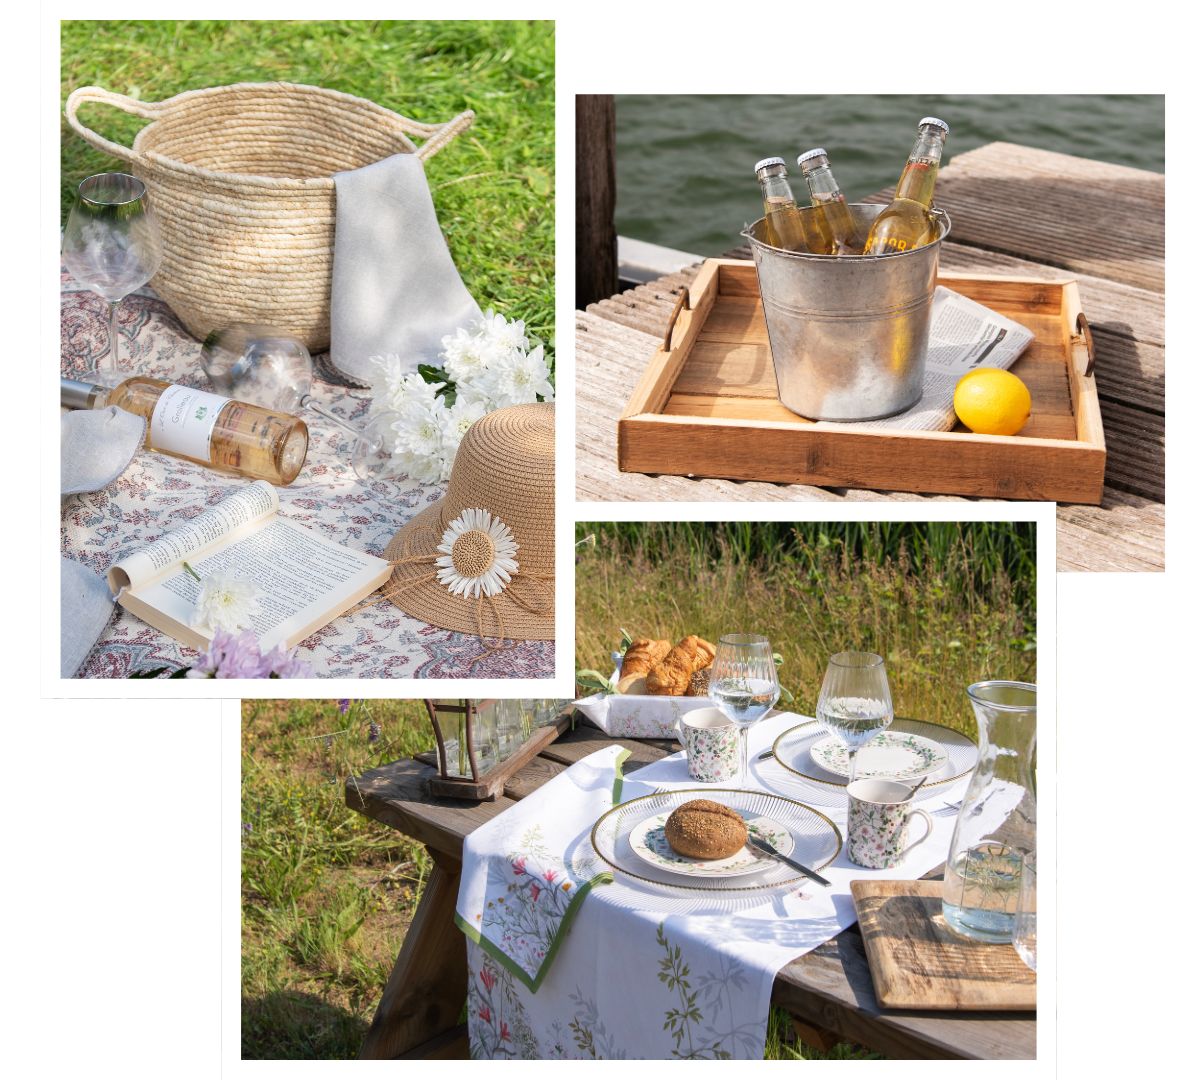 Collage of 3 photos. One photo shows a picnic. The second photo shows a tin bucket with beer bottles in it, and the last photo shows a set table outdoors.